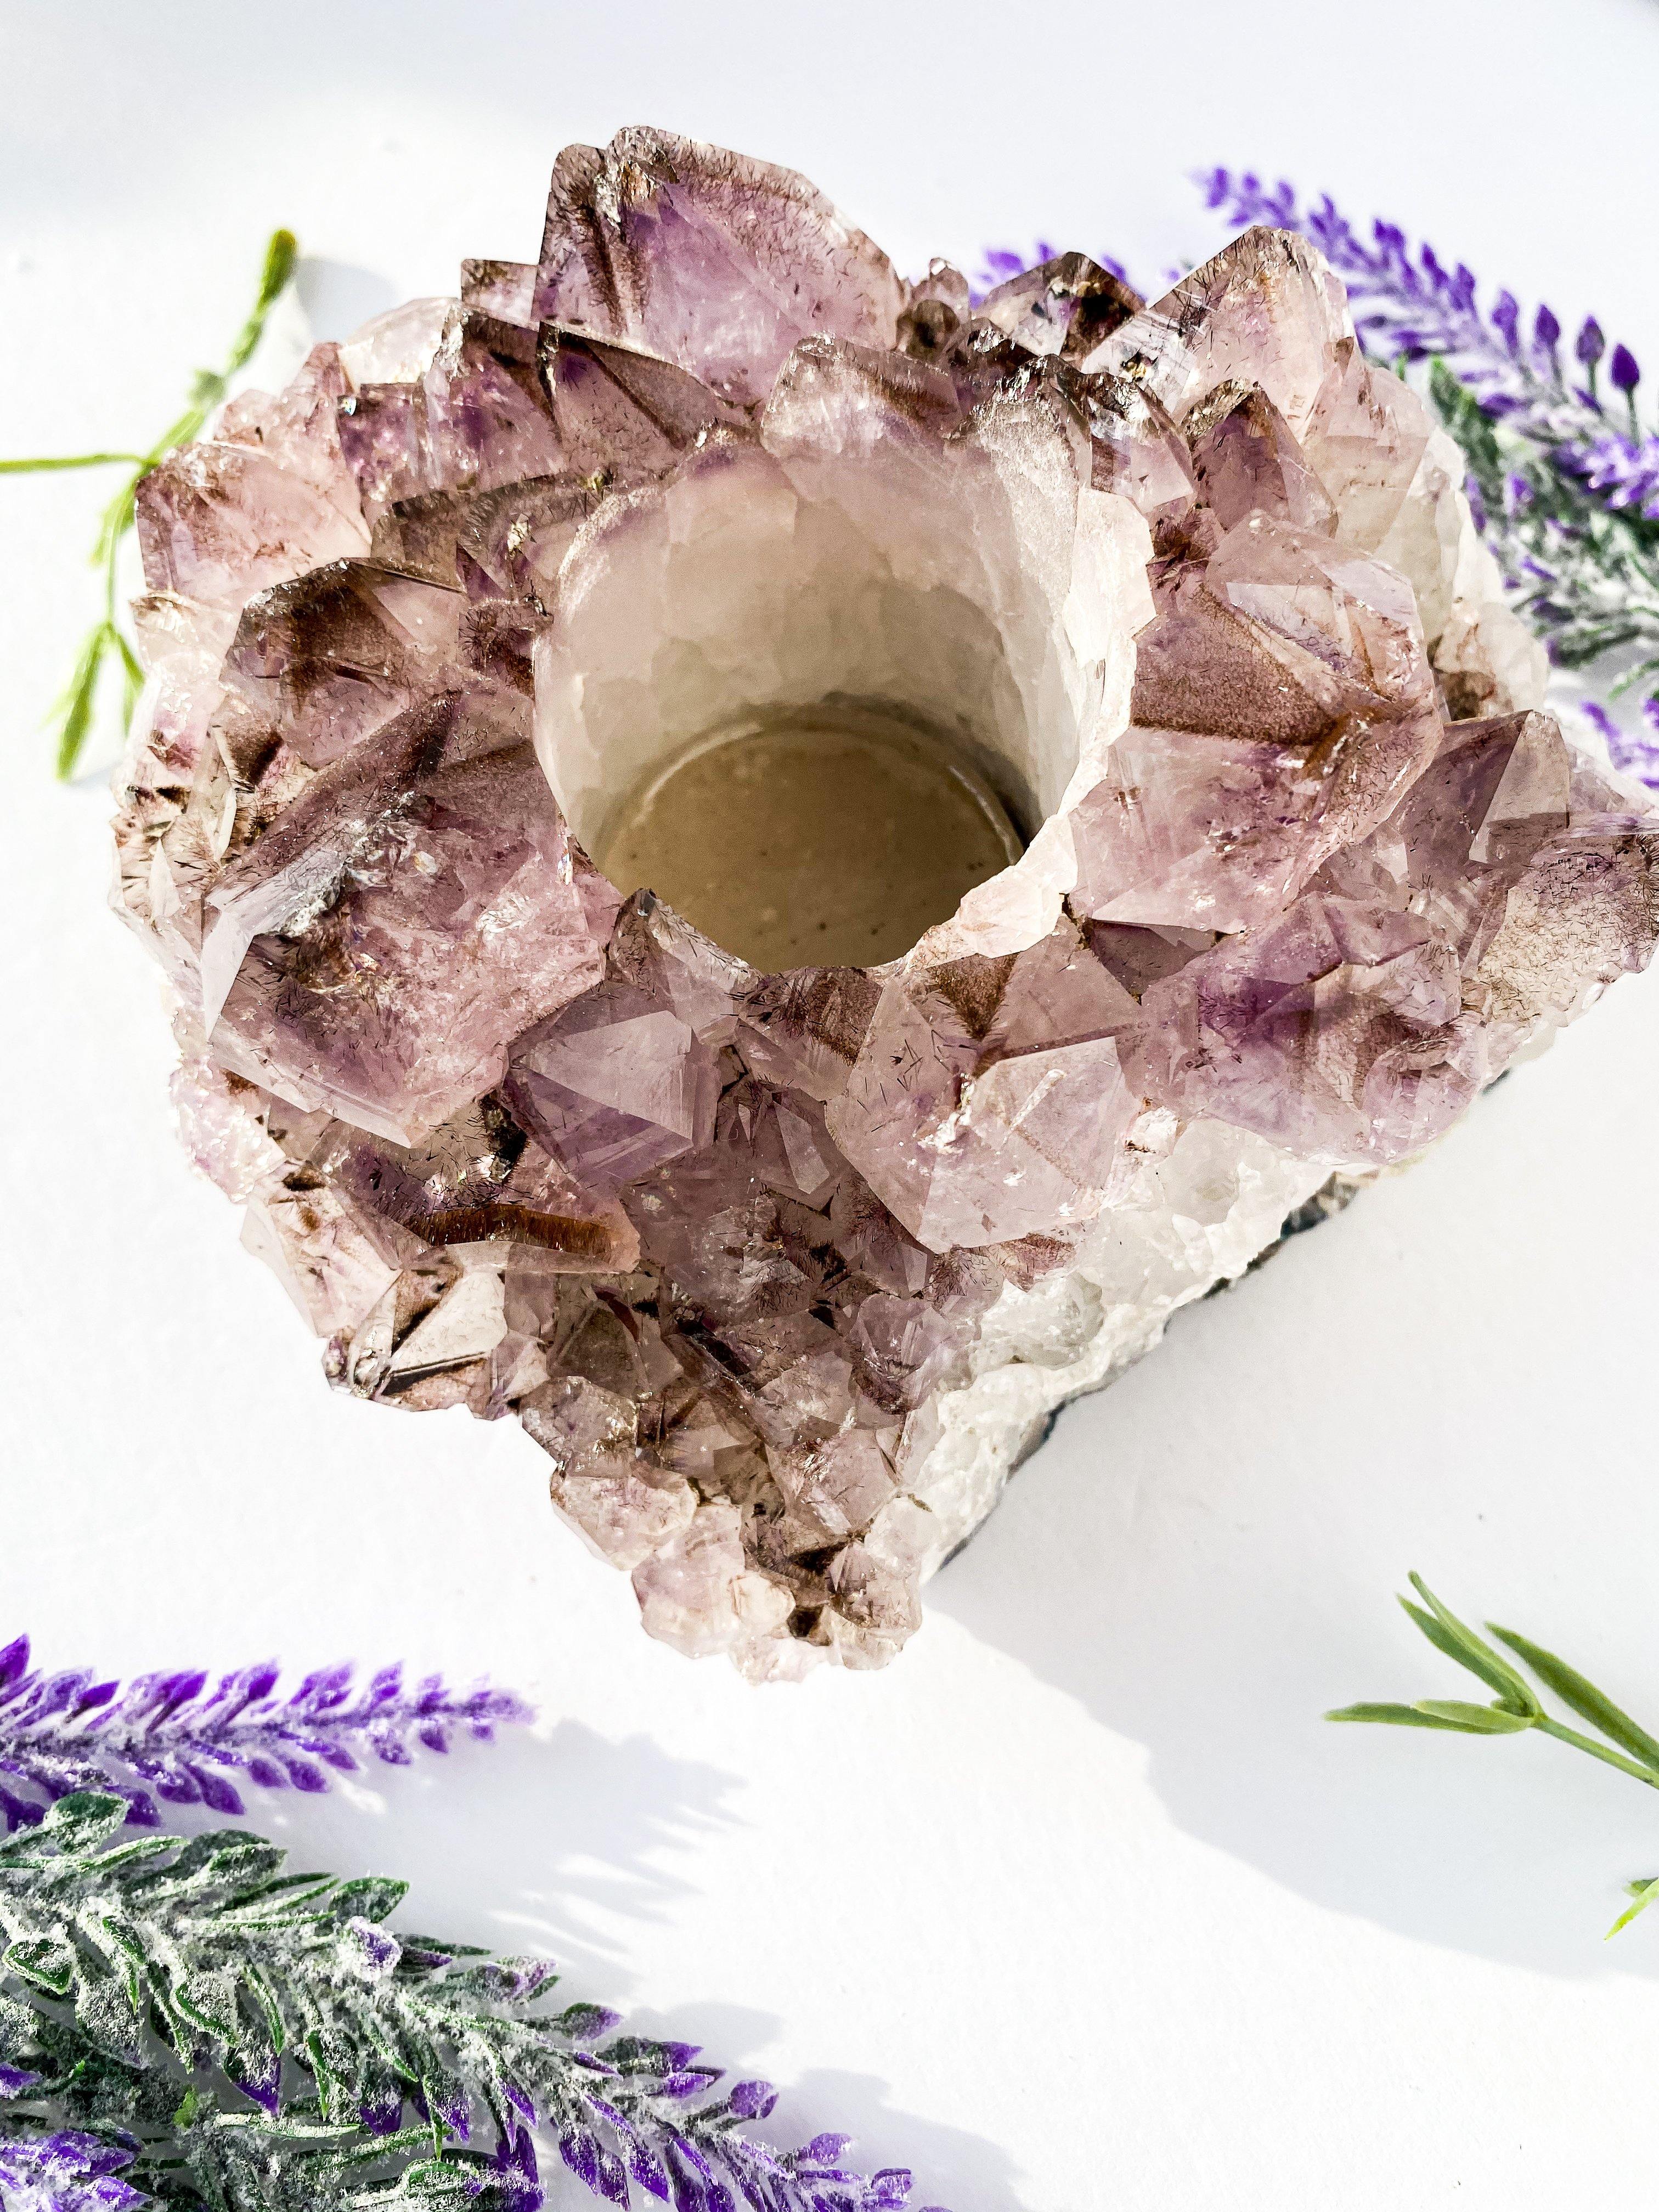 Celestial 333 Unique Crystals Large Amethyst Candle Holder